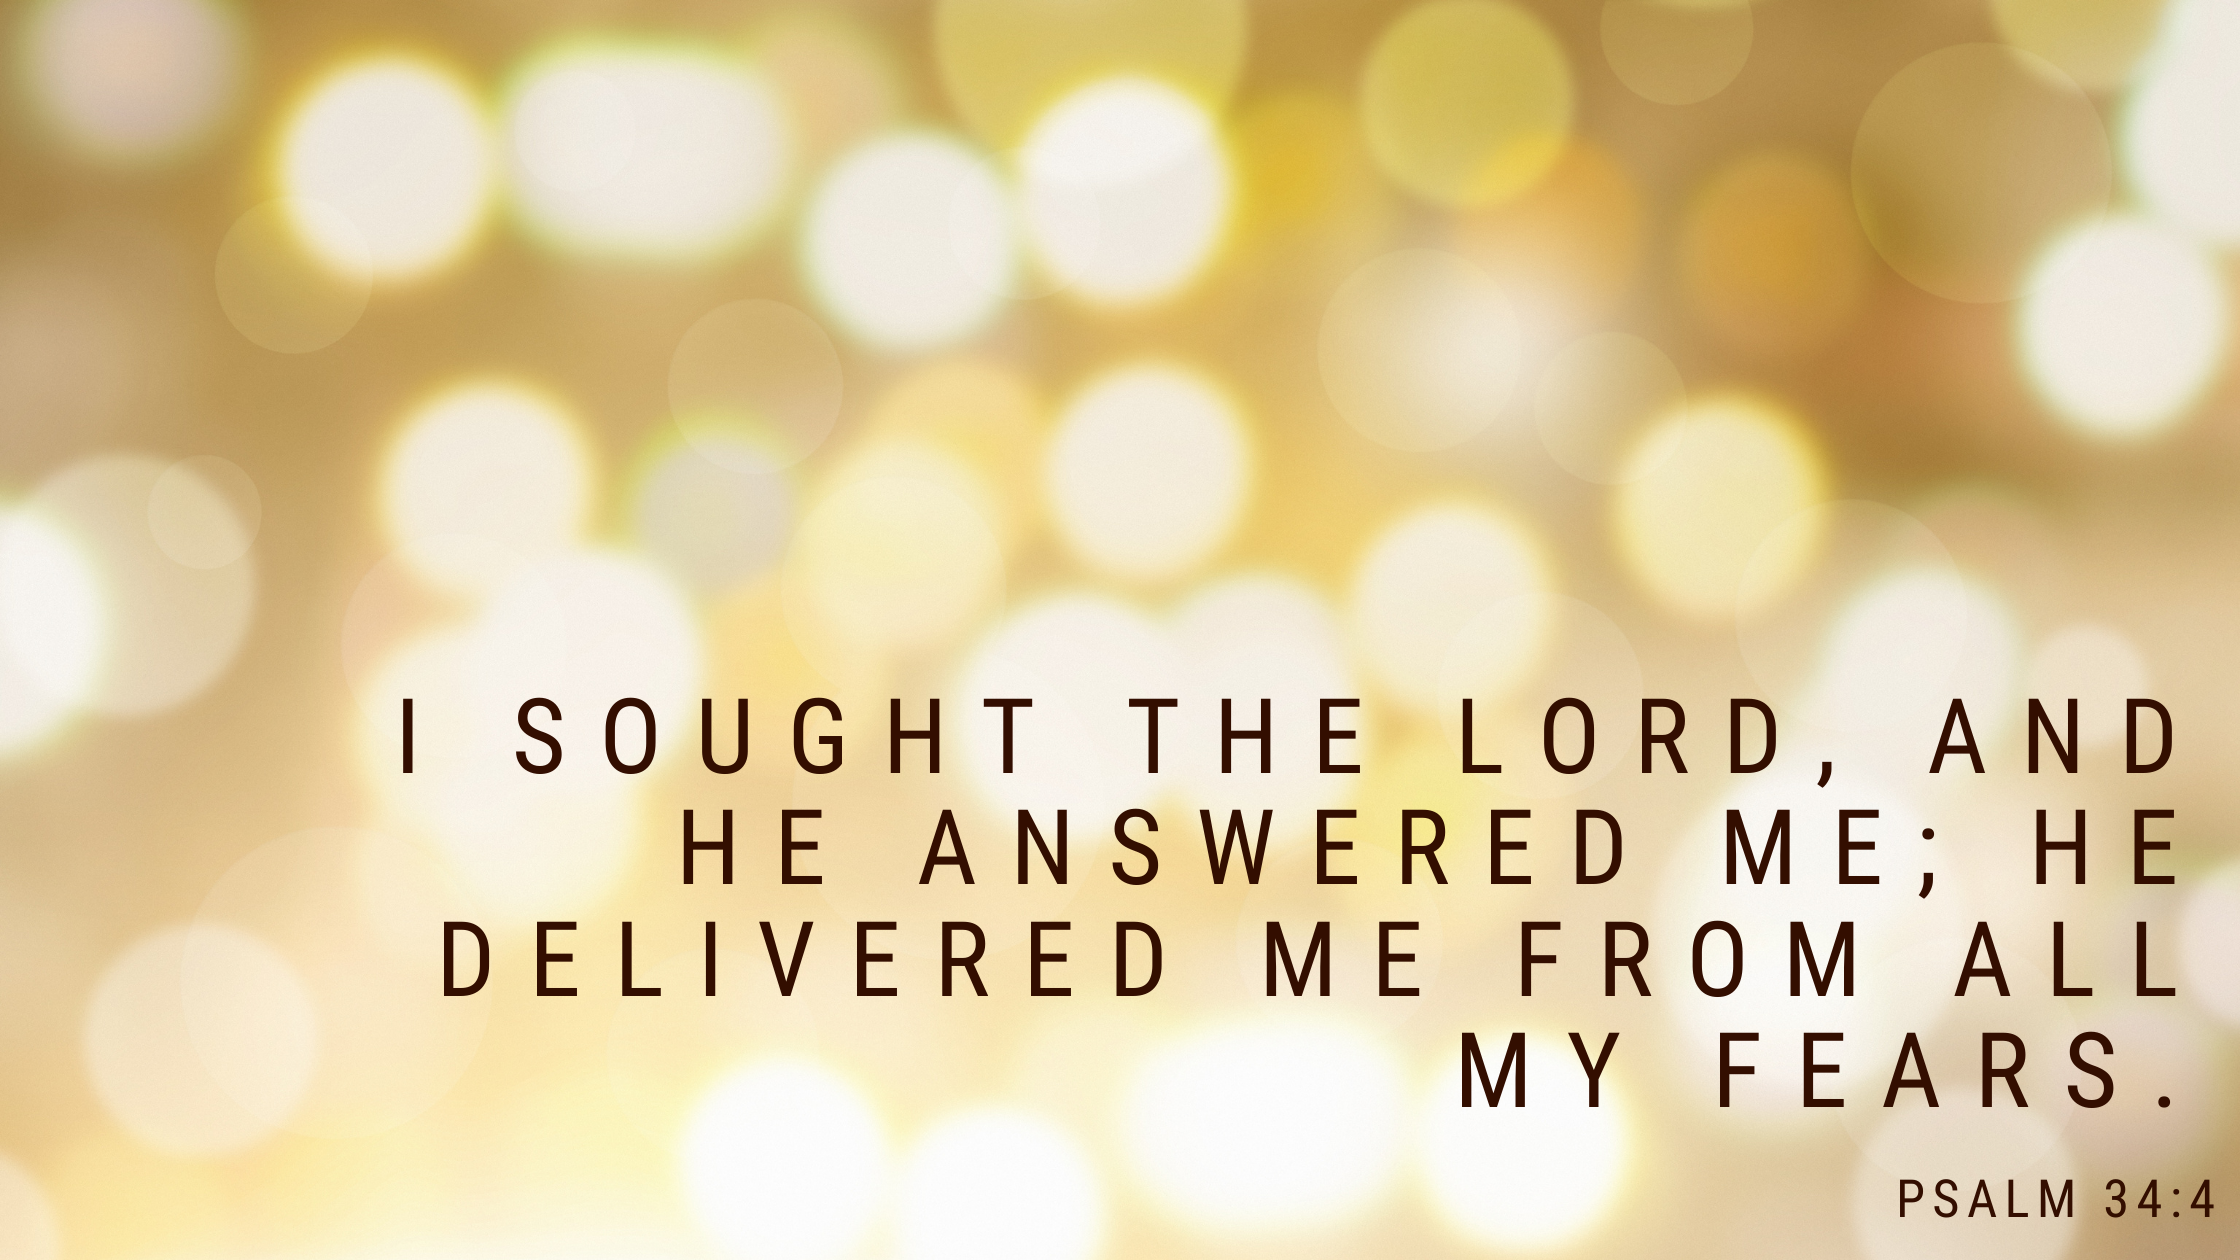 I sought the Lord, and he answered me; he delivered me from all my fears.” - Psalm 344